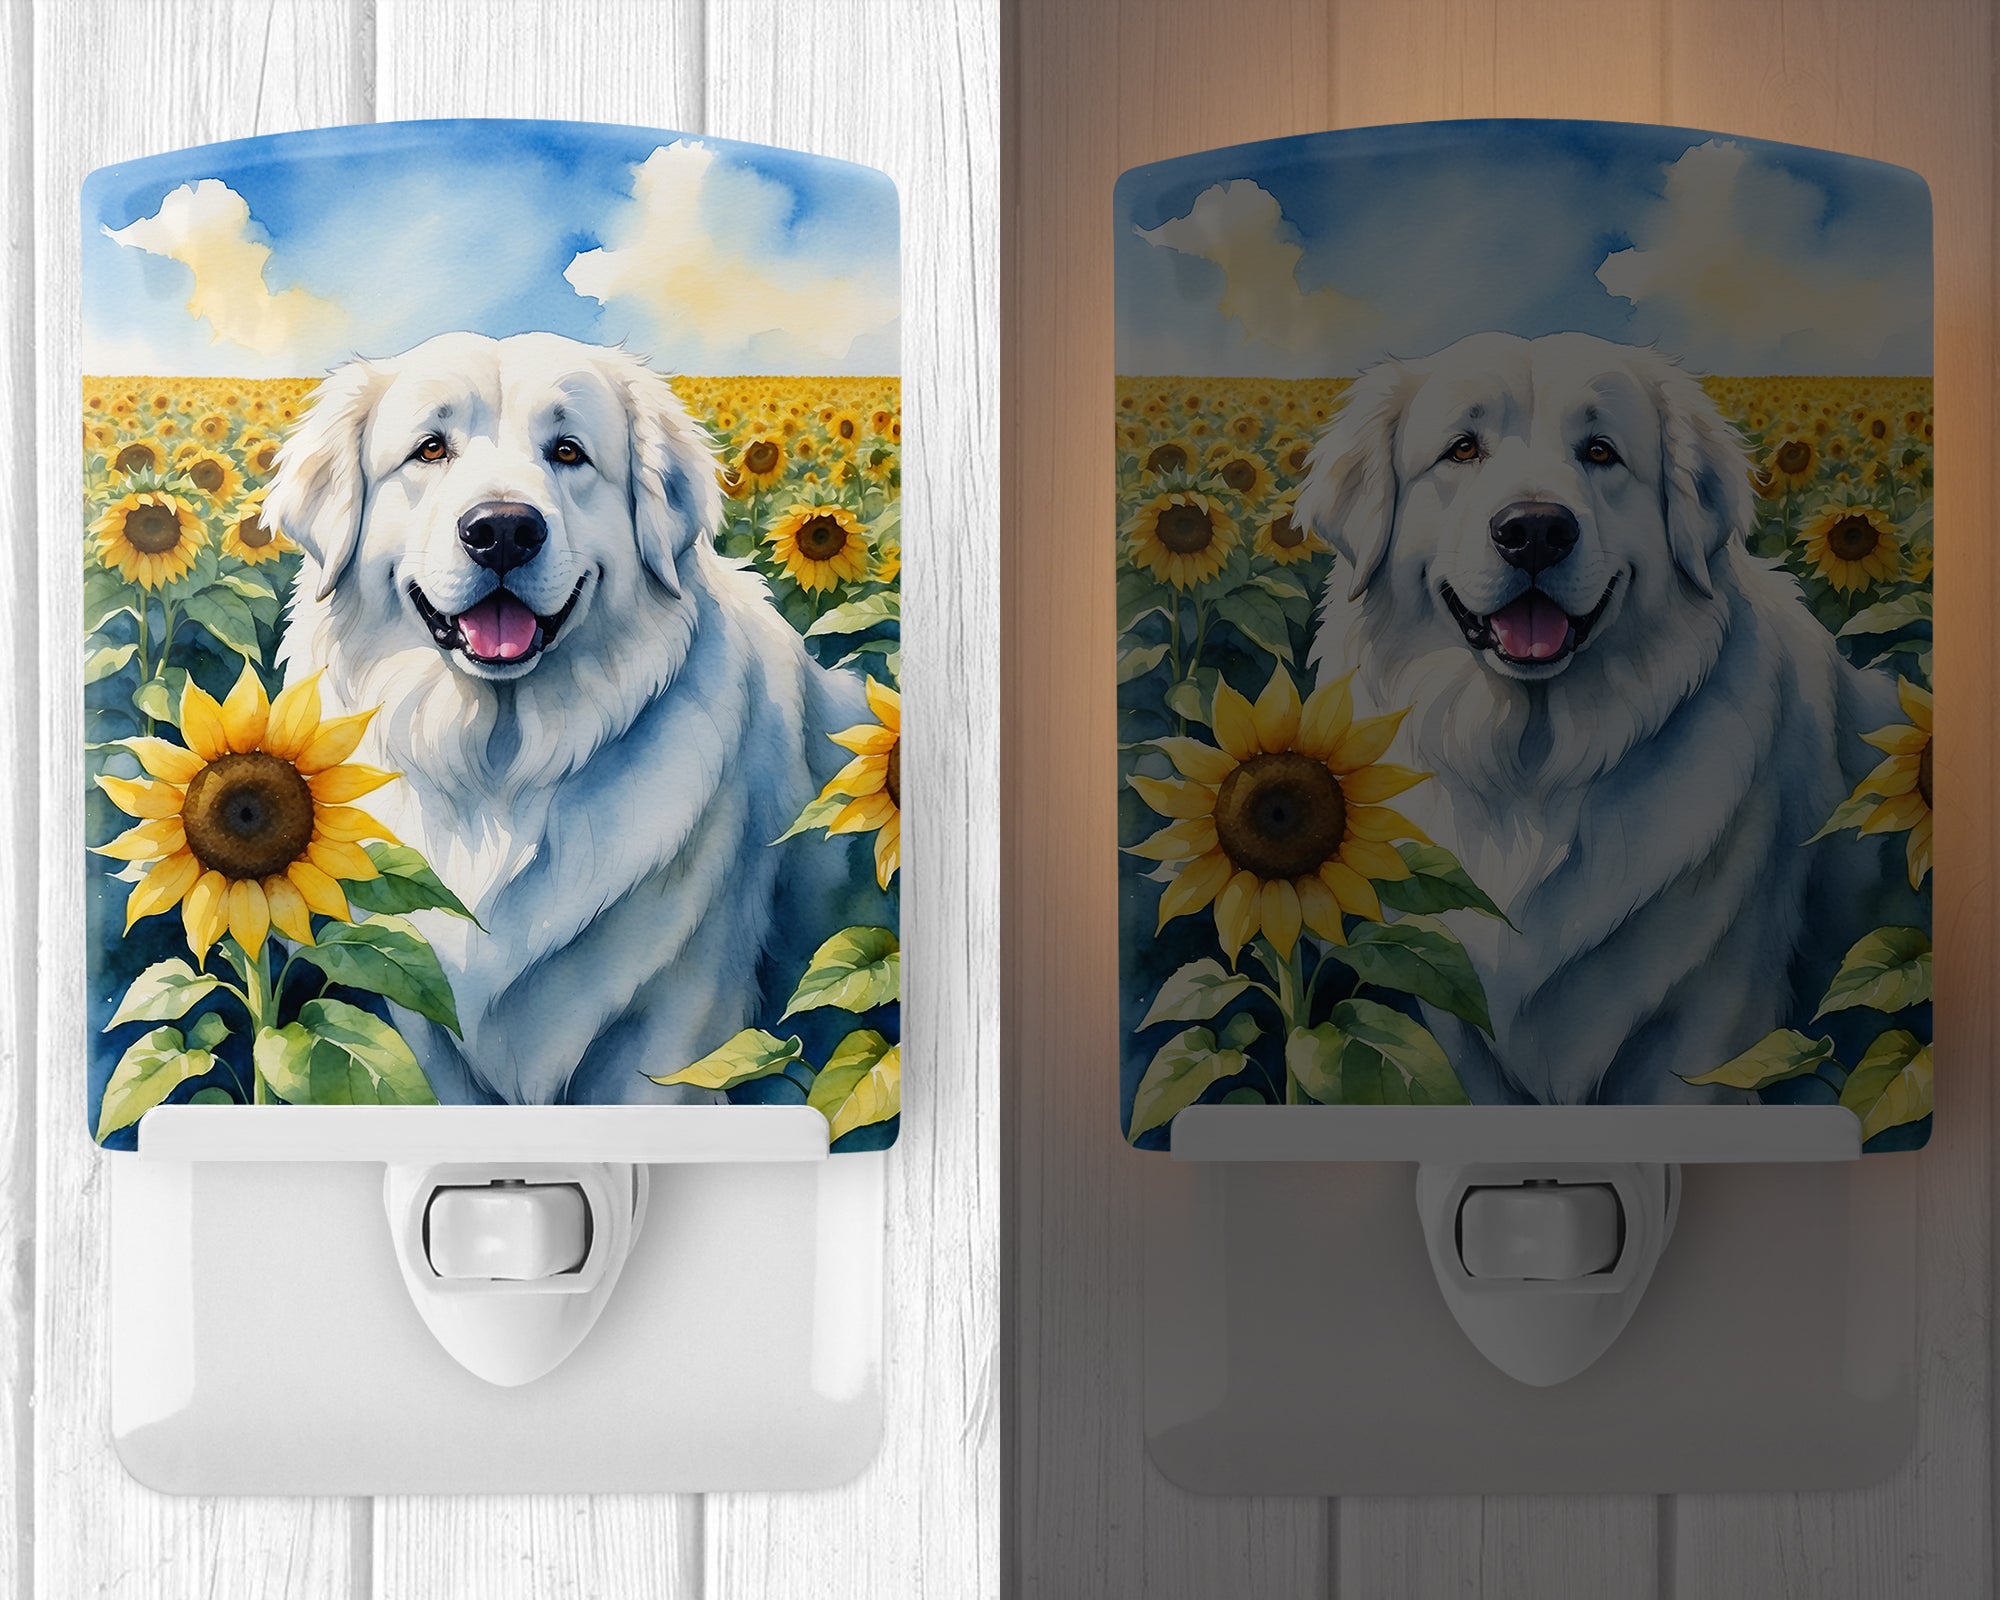 Buy this Great Pyrenees in Sunflowers Ceramic Night Light